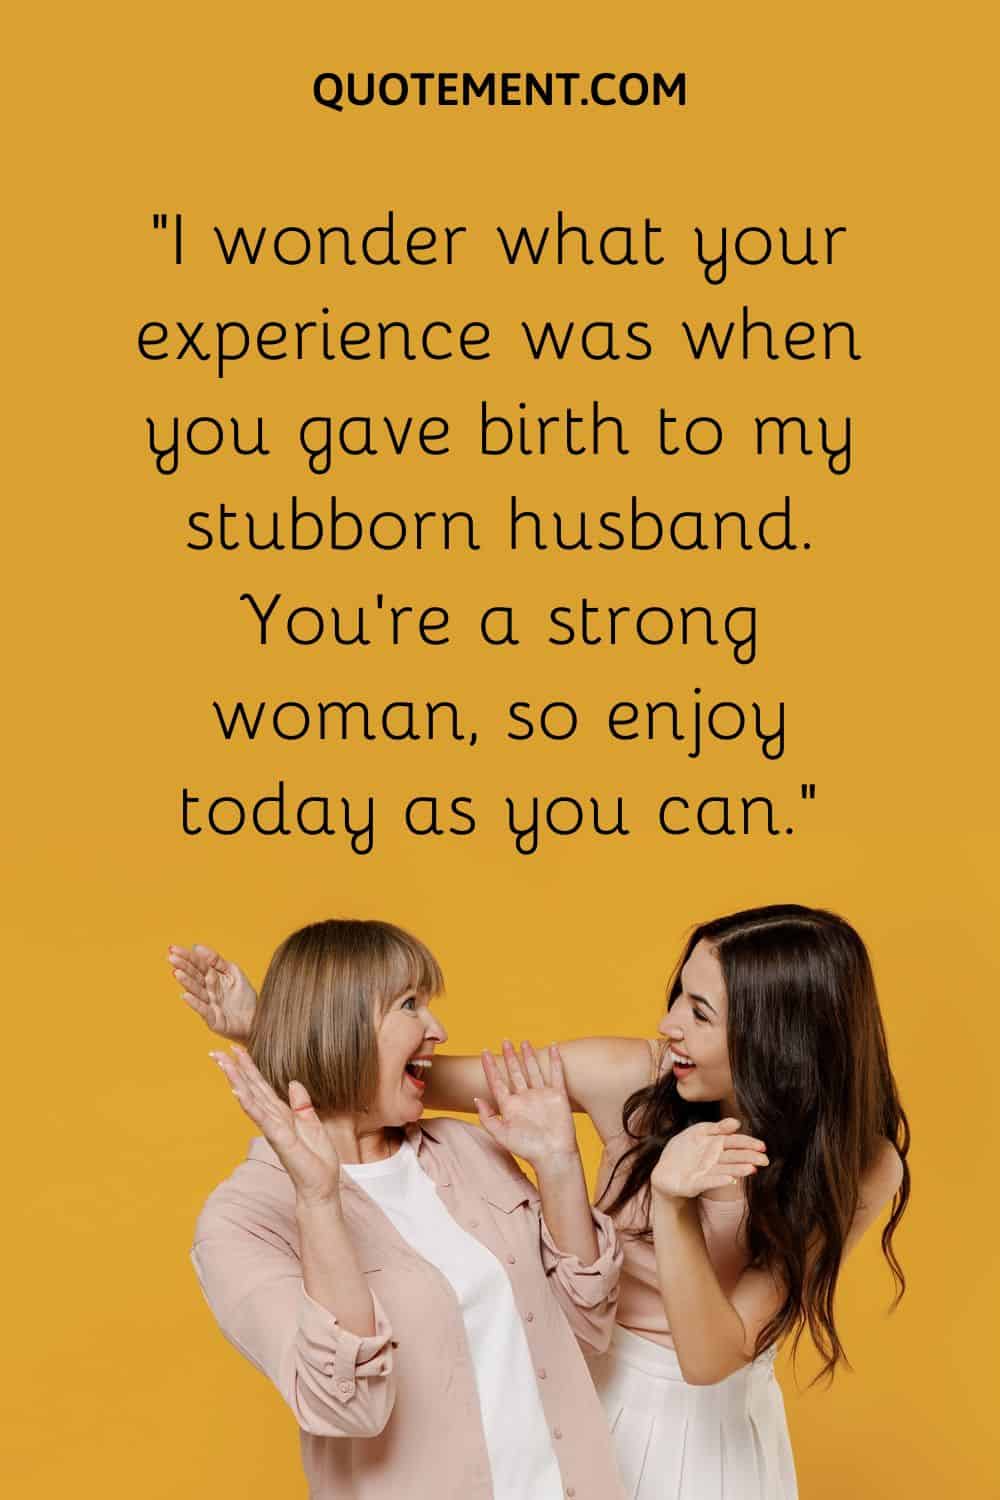 You’re a strong woman, so enjoy today as you can